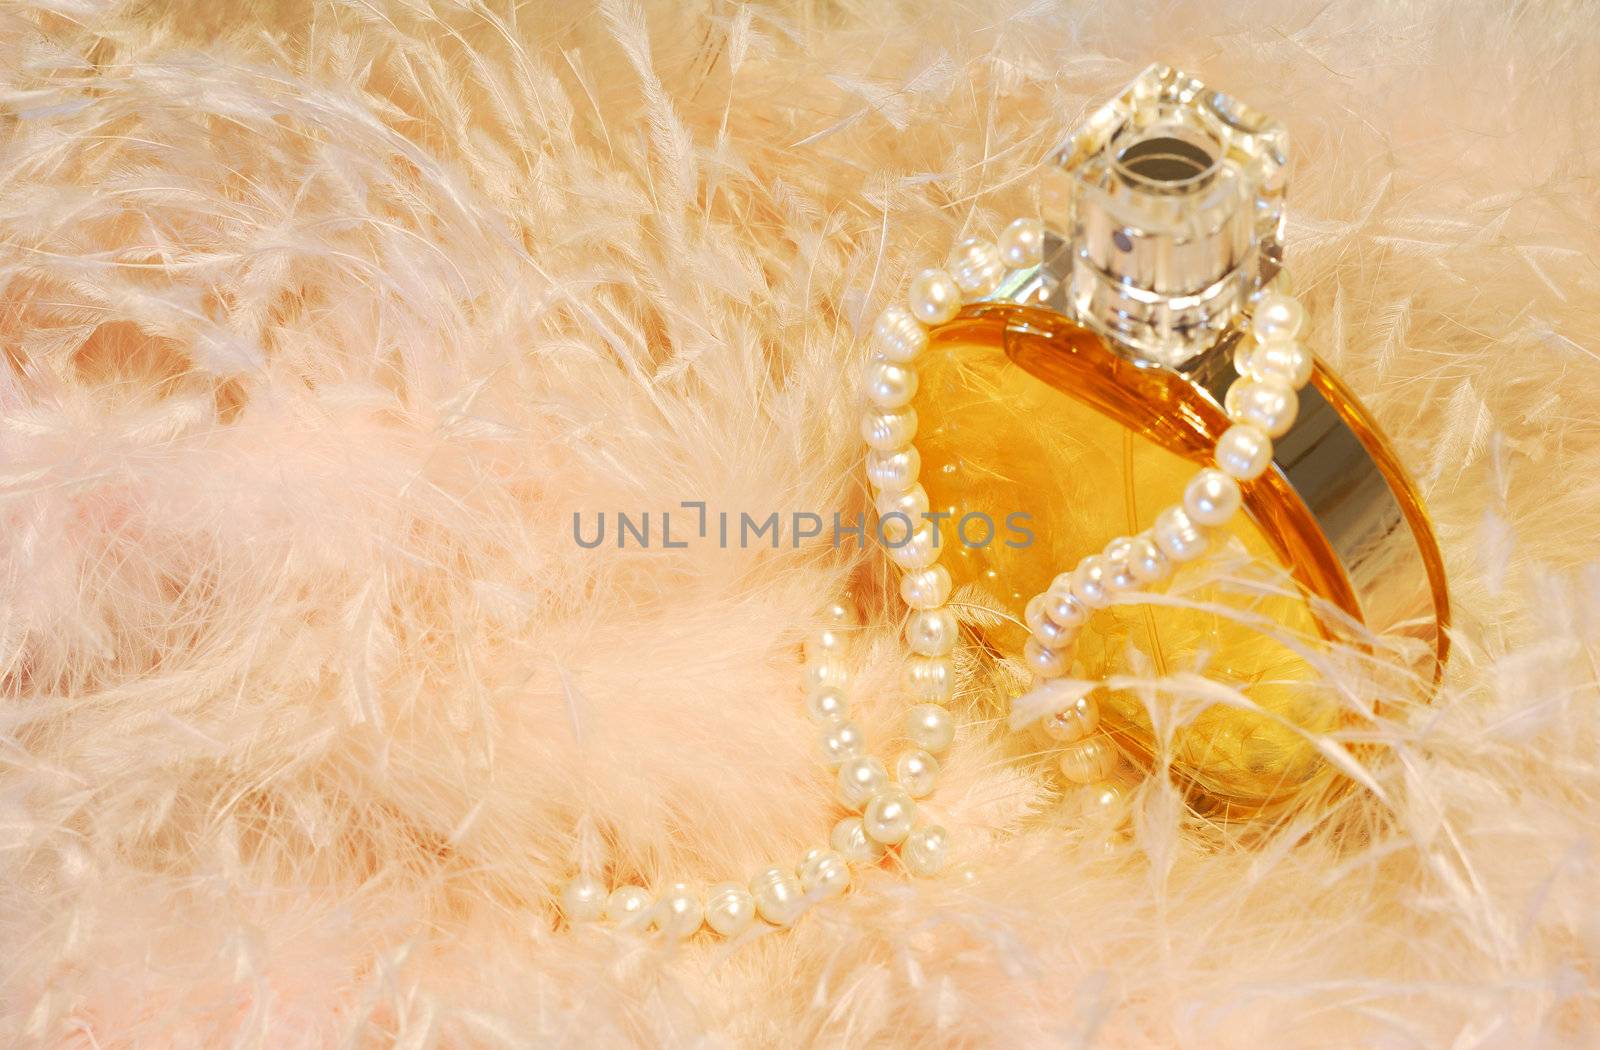 Feathers, necklace and perfume by akarelias